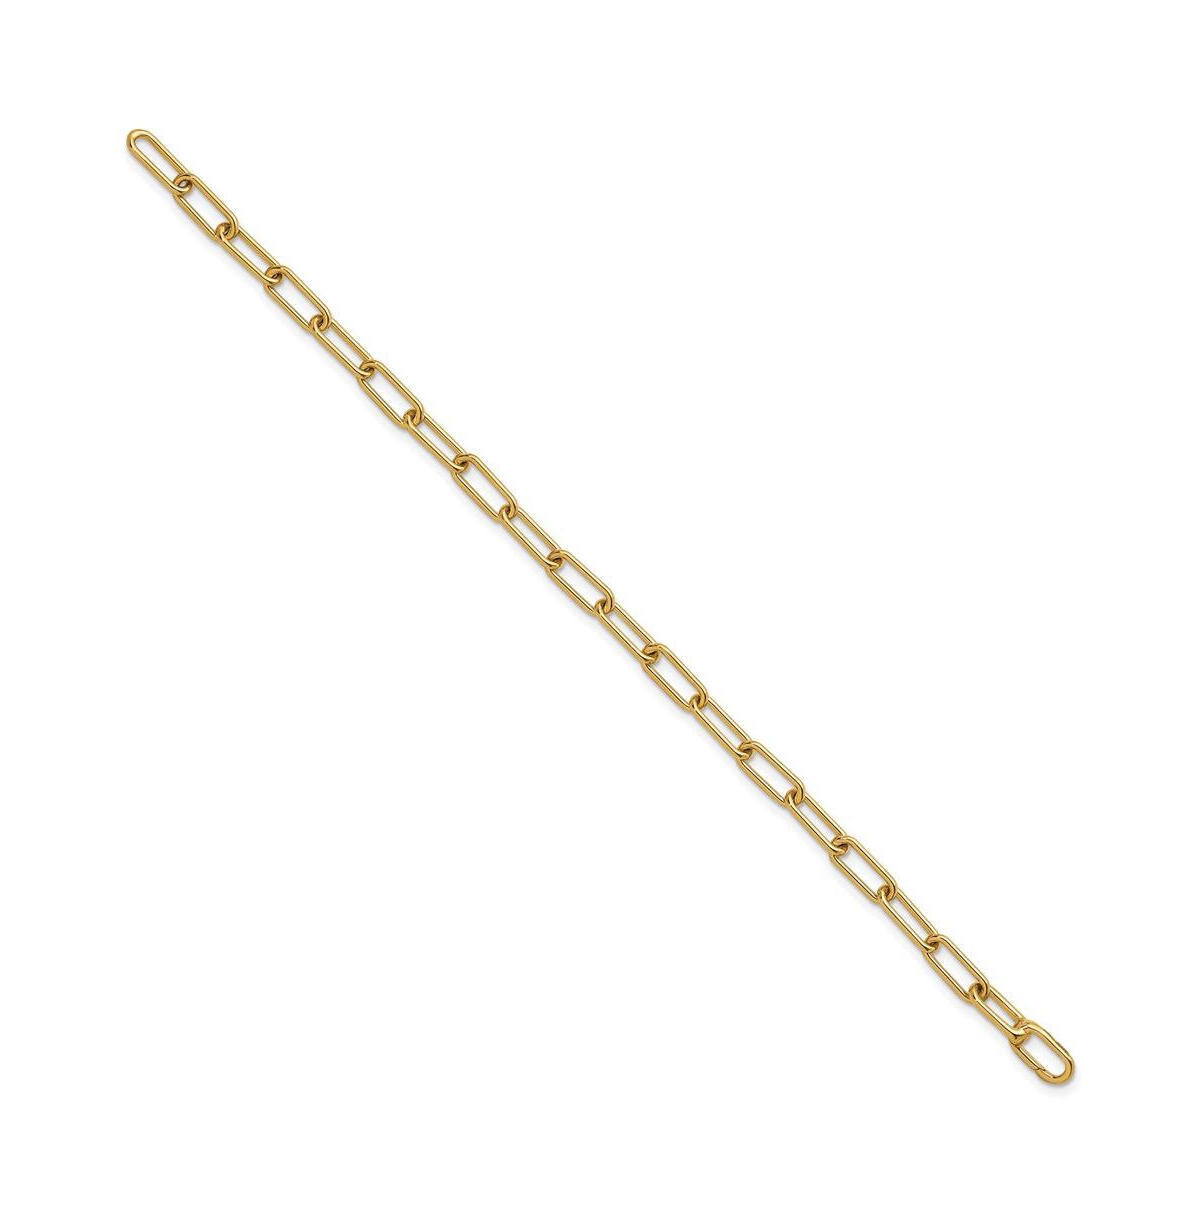 18k Yellow Gold Solid Paperclip Link Chain Bracelet - Gold